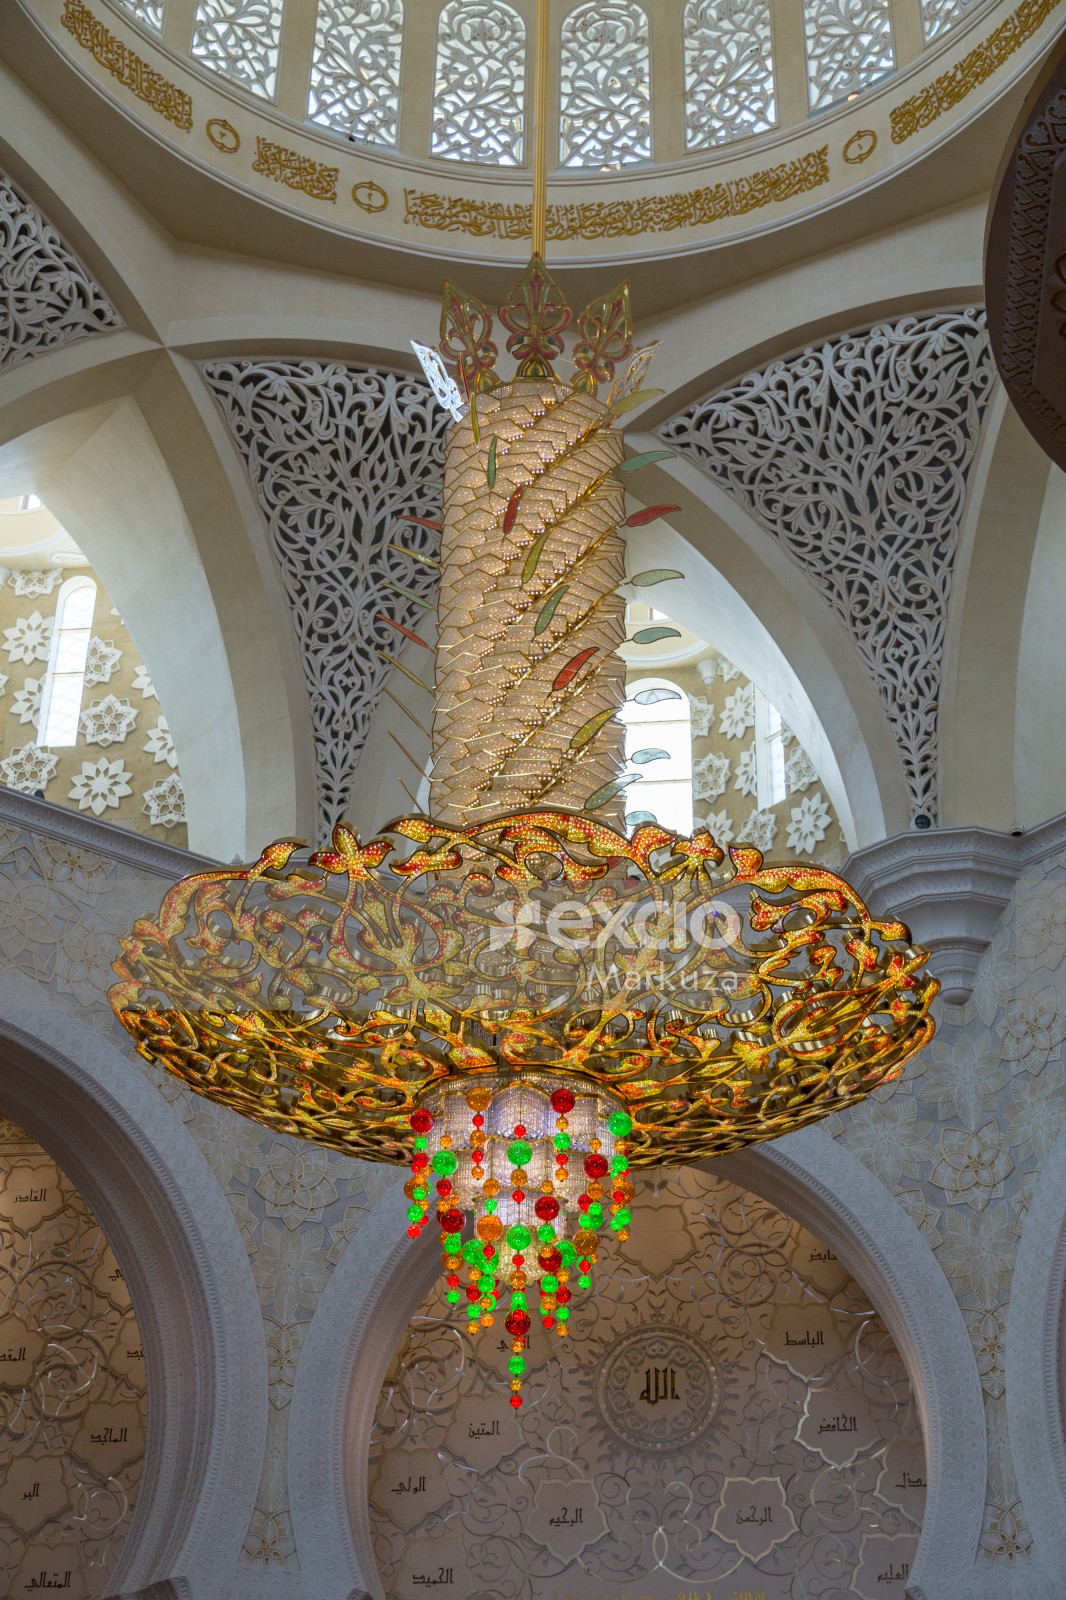 The glass chandelier of the grand Mosque